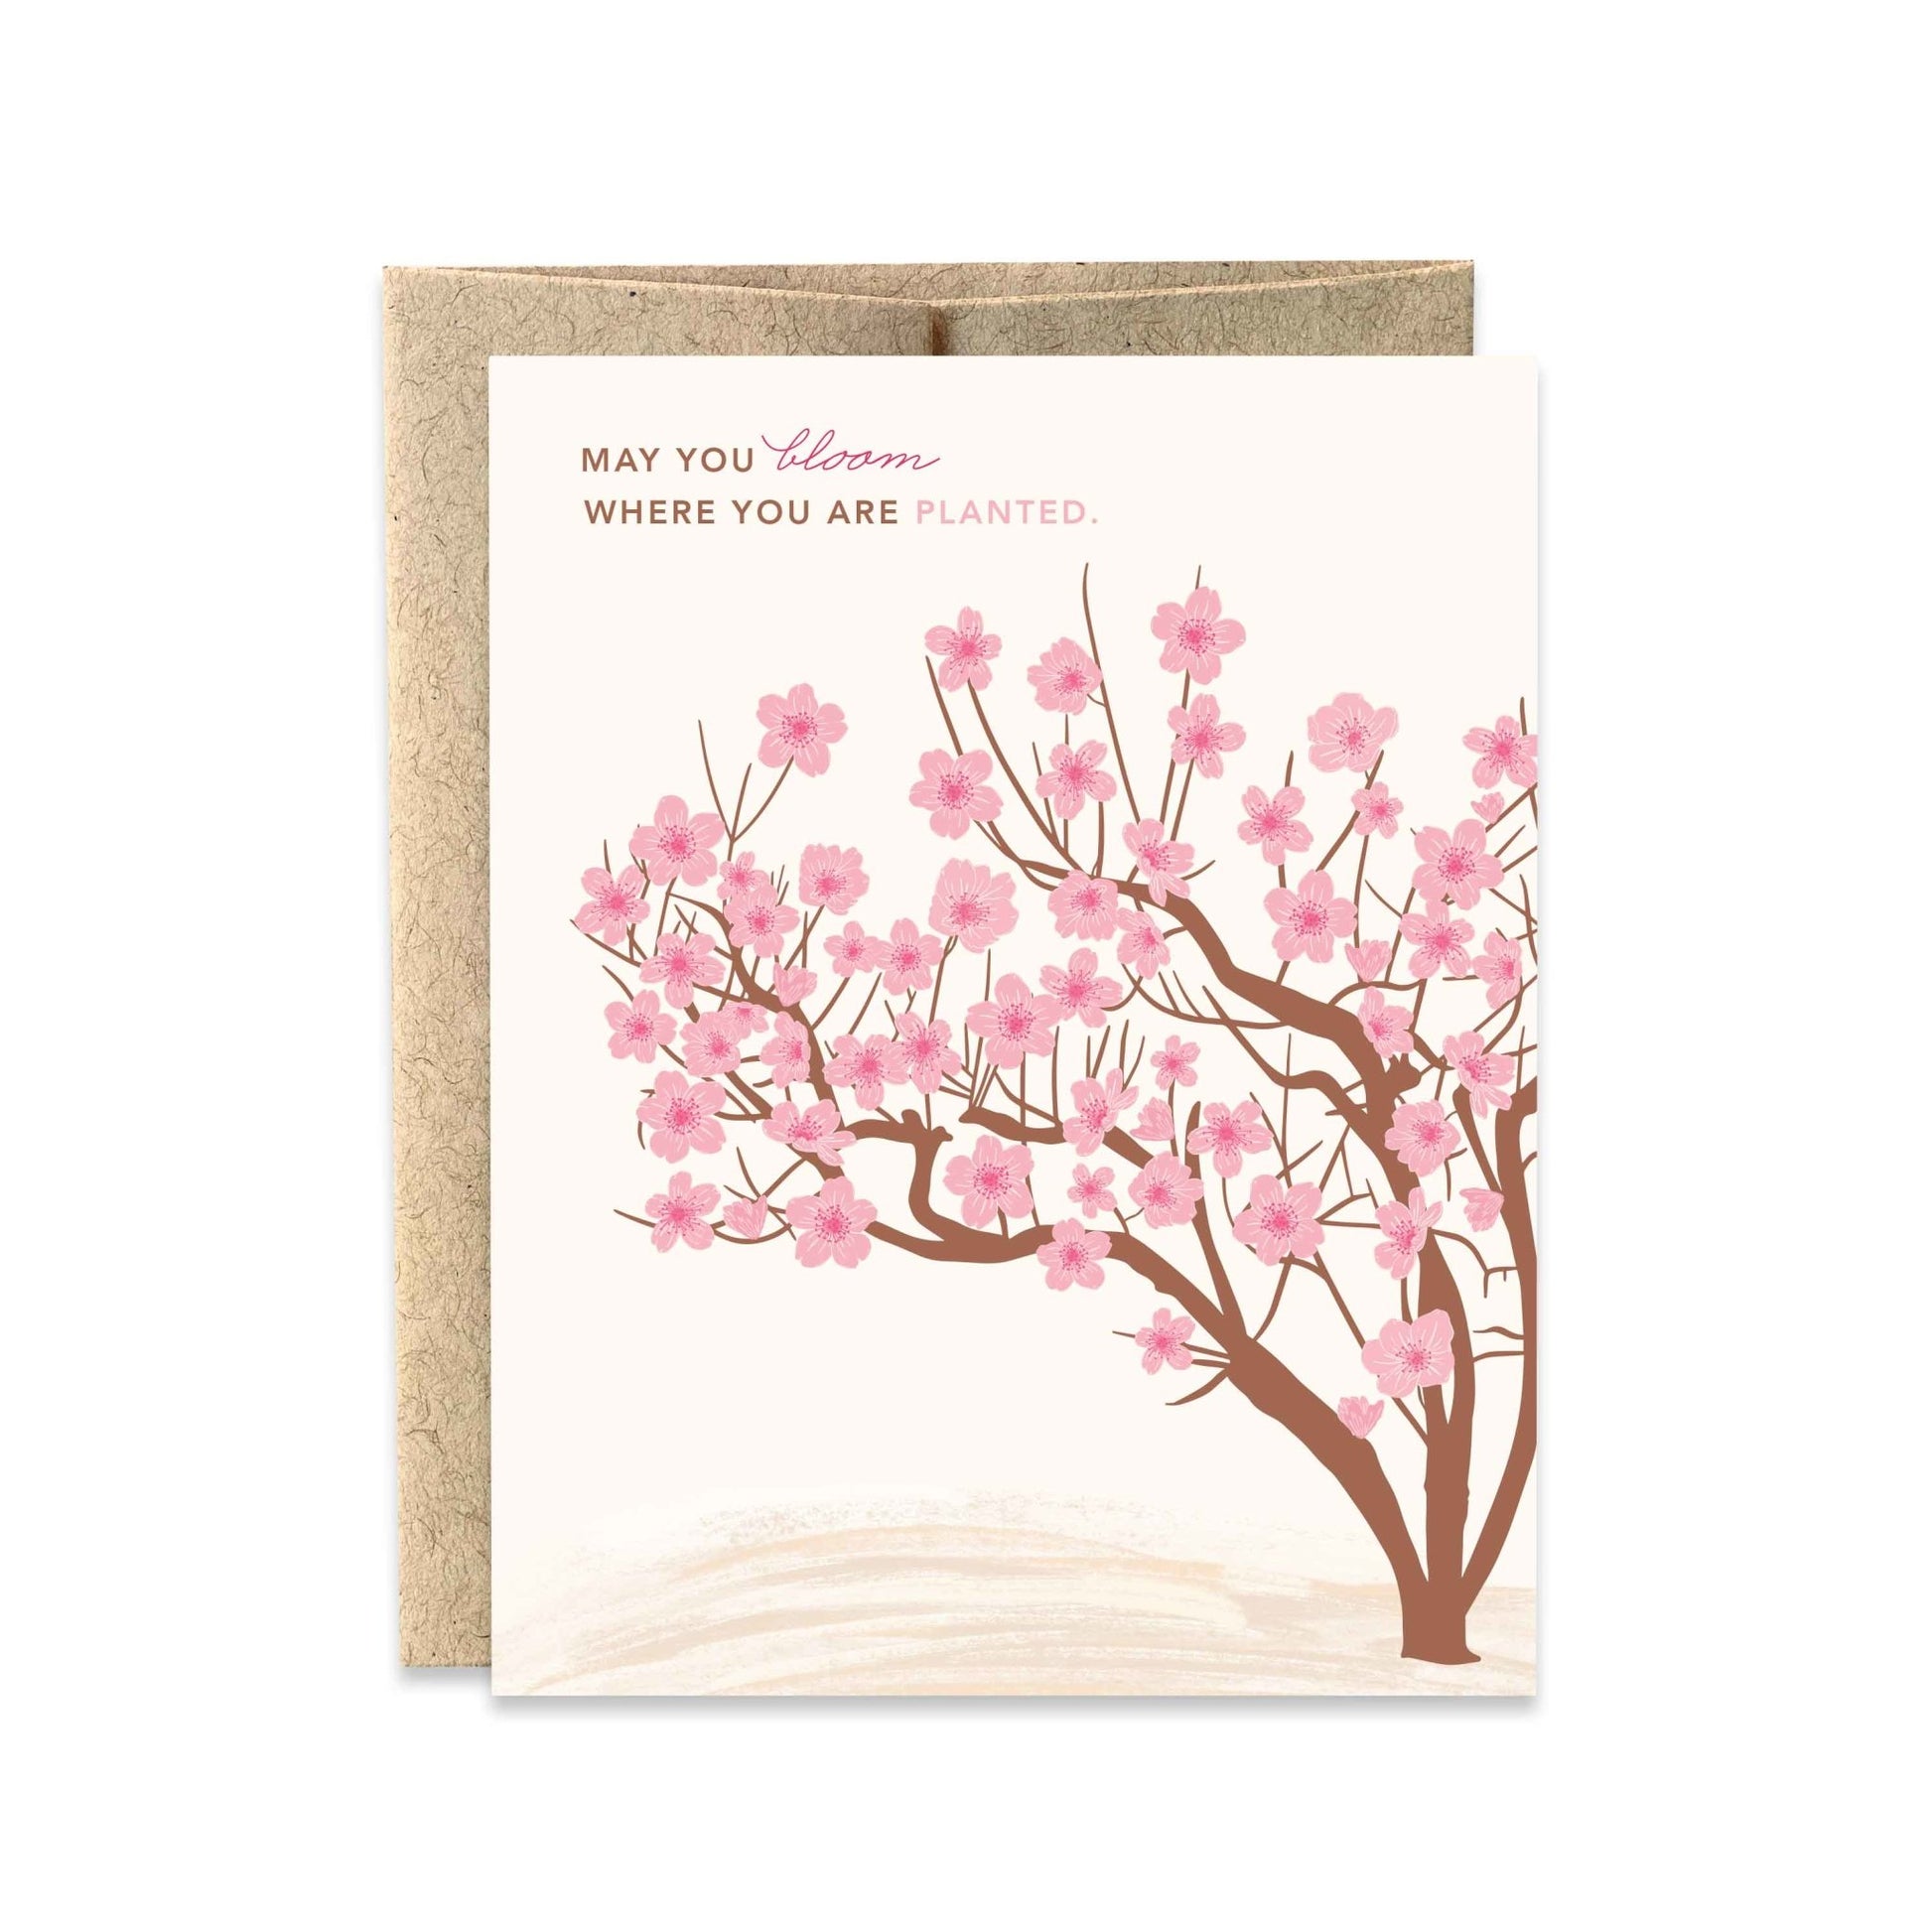 Paper Farm Press - "May you bloom where you are planted" Graduation Card - Fenwick & OliverPaper Farm Press - "May you bloom where you are planted" Graduation CardPaper Farm PressFenwick & OliverGP052